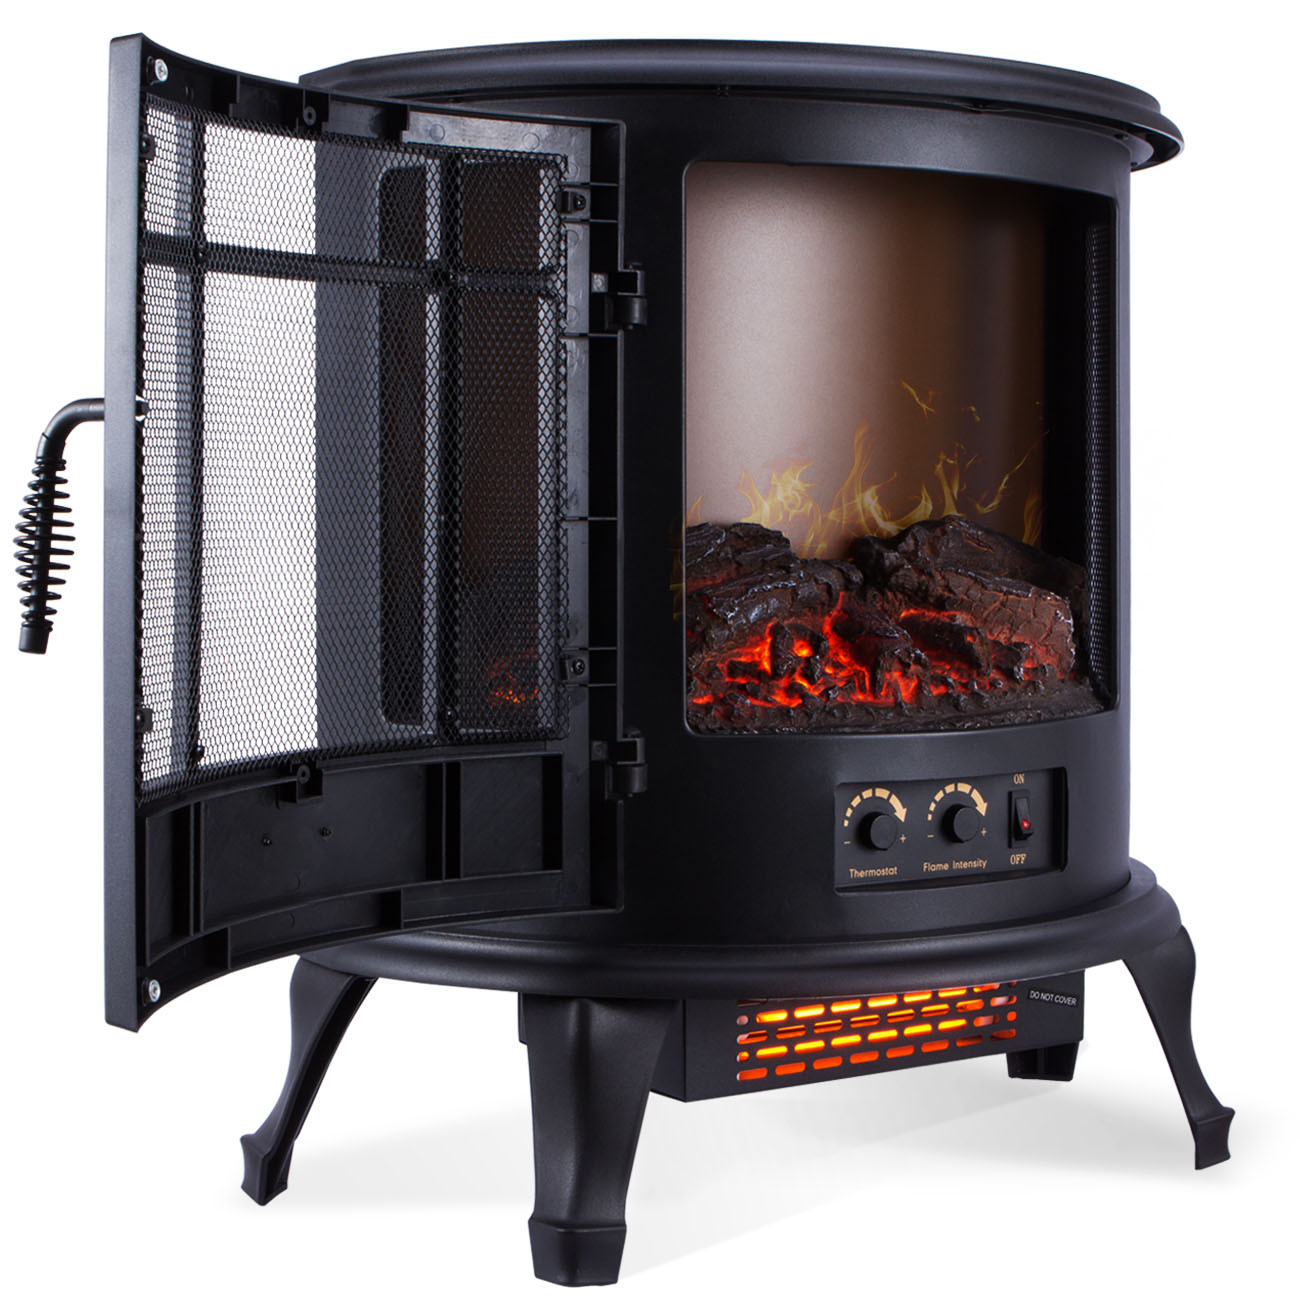 Retro Electric Fireplace
 1400W Free Standing Vintage Electric Fireplace Firebox